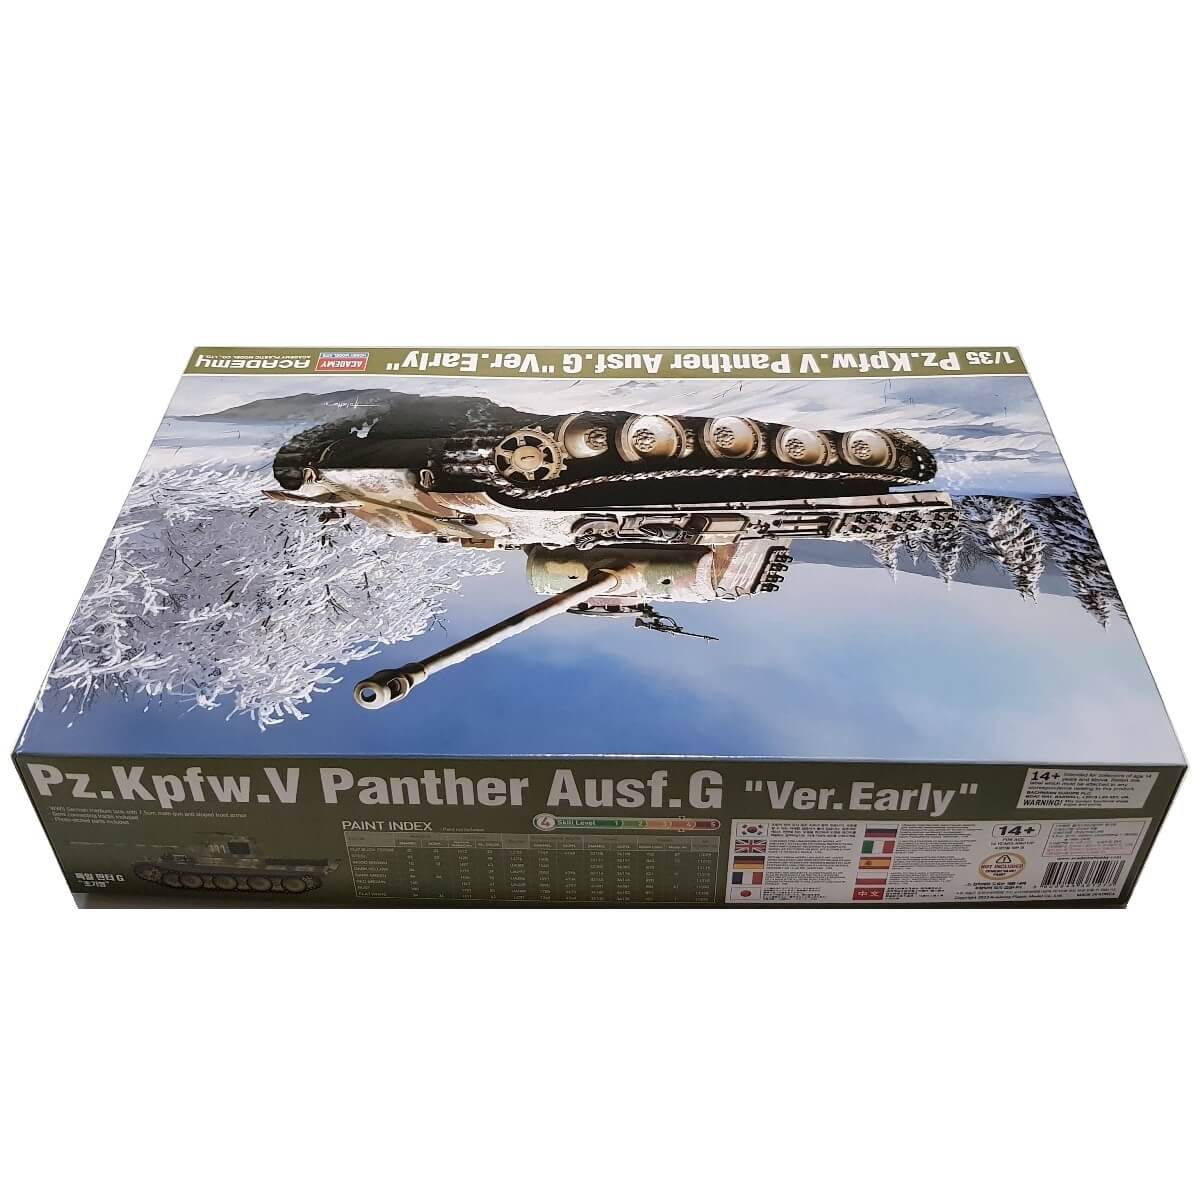 1:35 Pz.Kpfw. V Panther Ausf. G - Early Production - ACADEMY